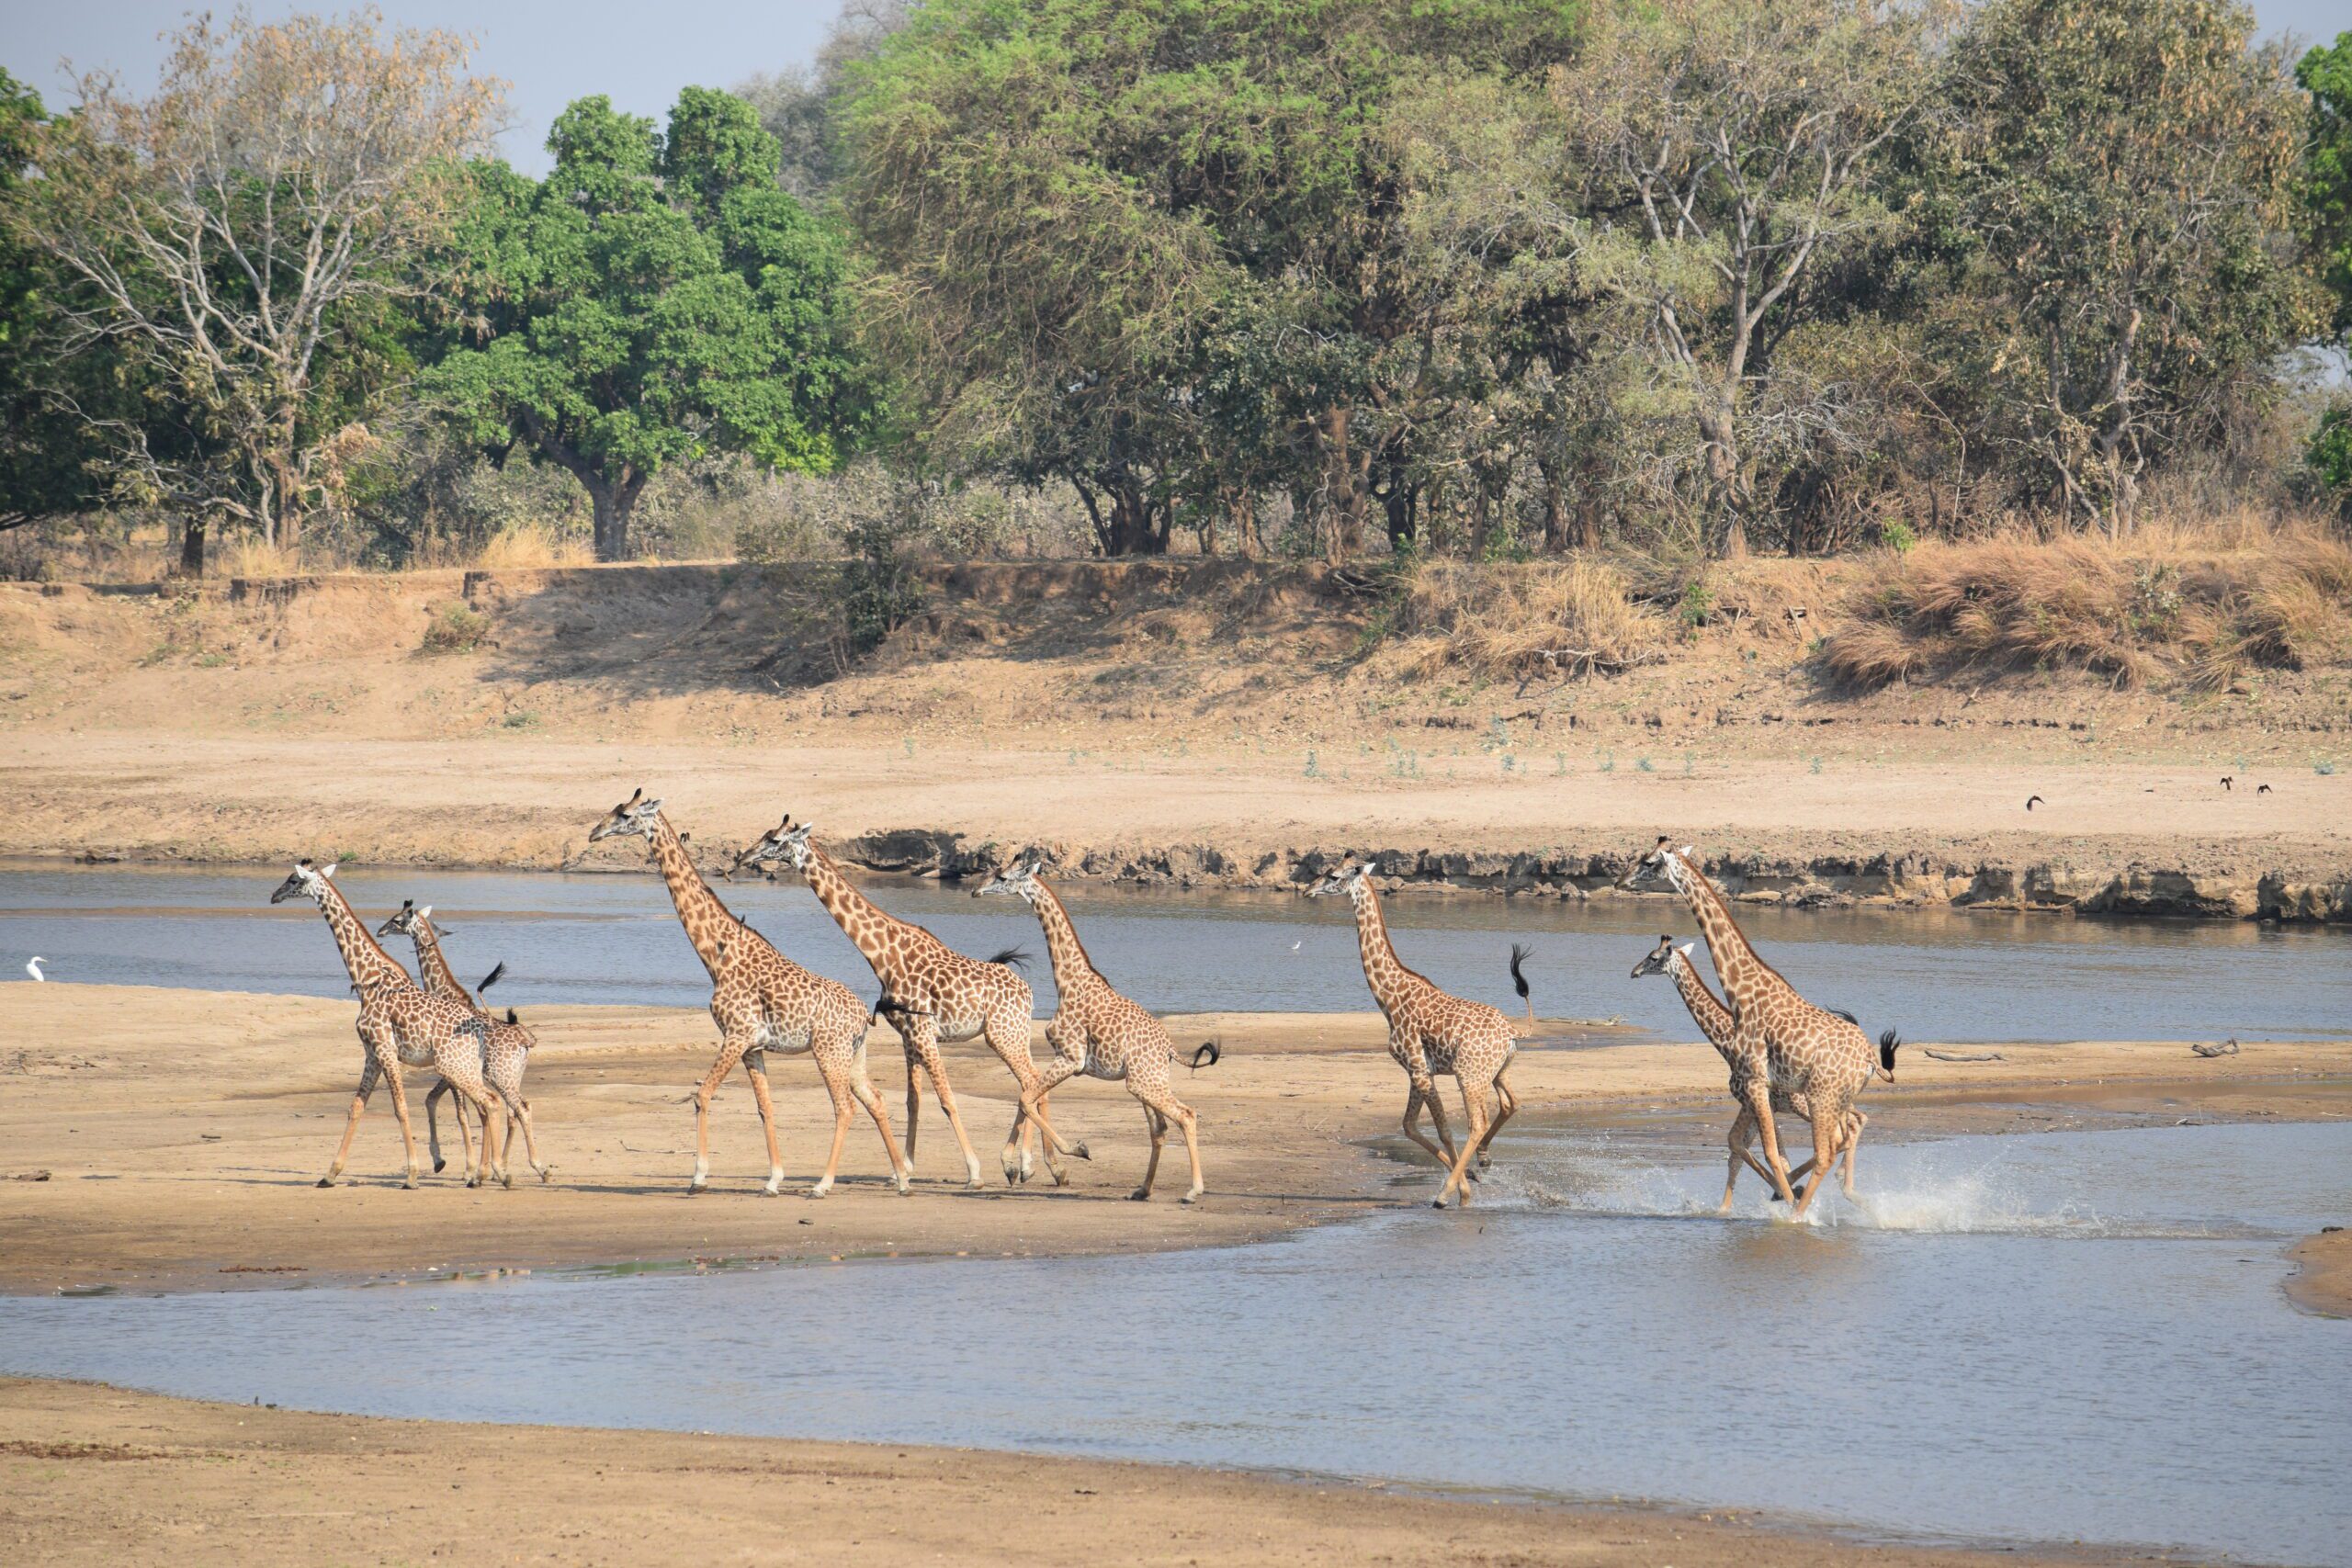 Giraffe running on the banks of a river